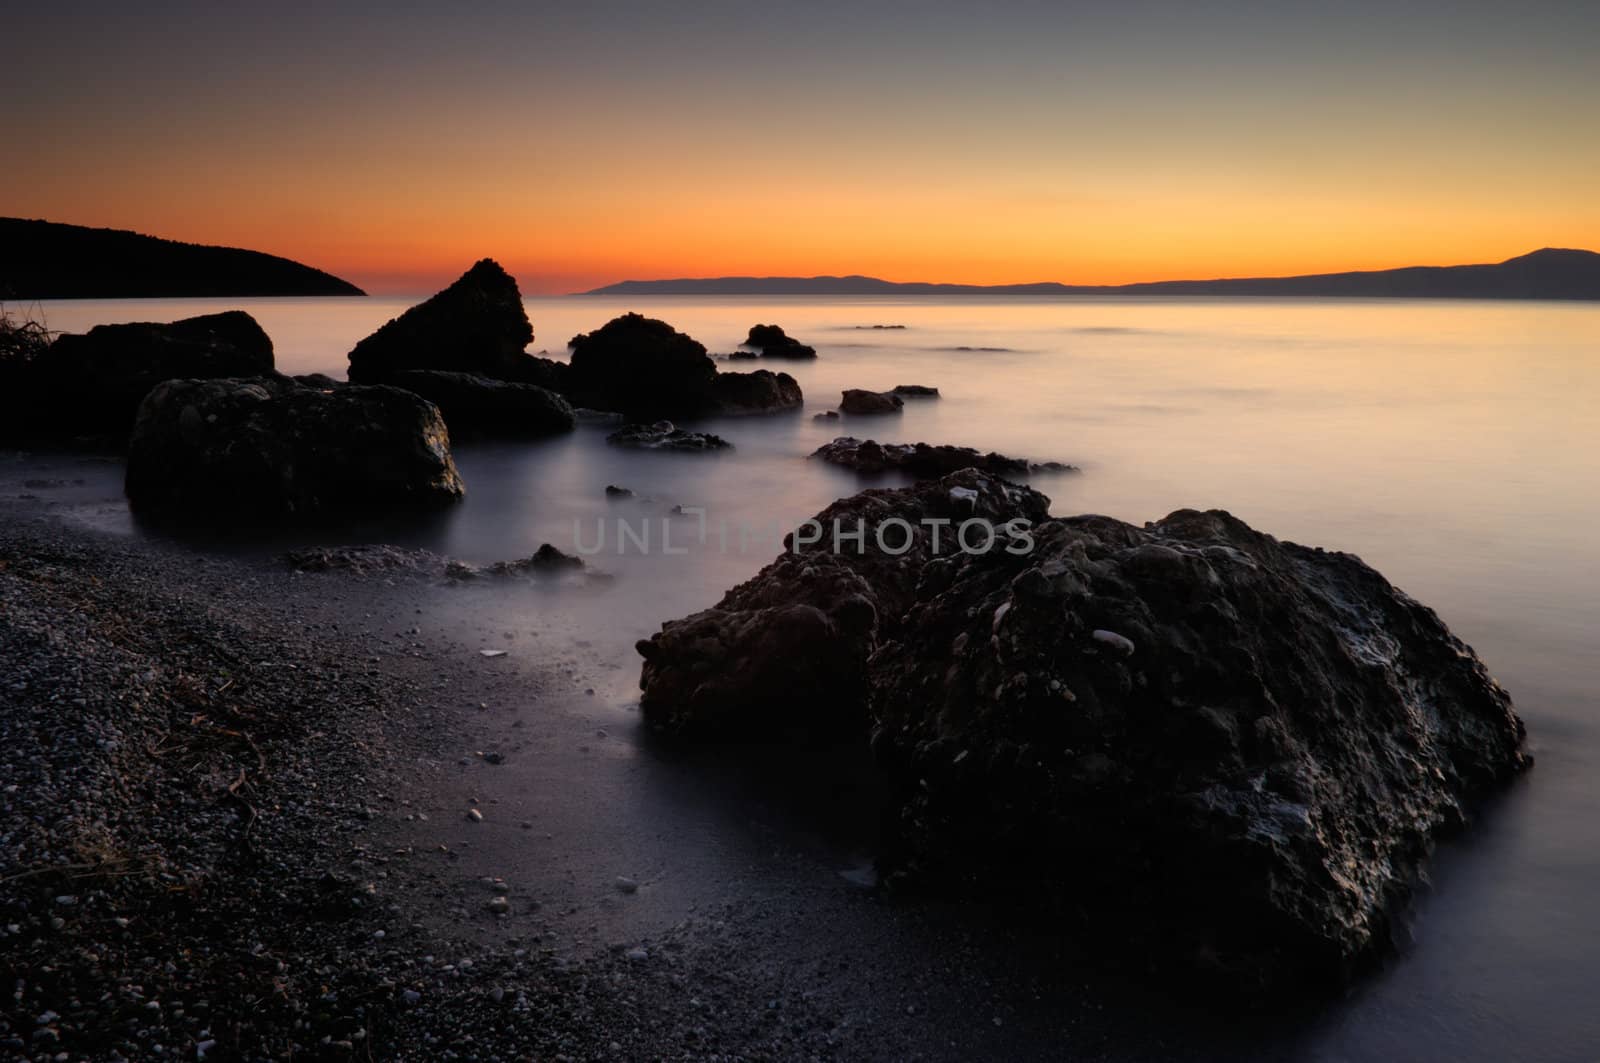 Picture of the rocky Sadova beach, in southern Greece, taken after sunset